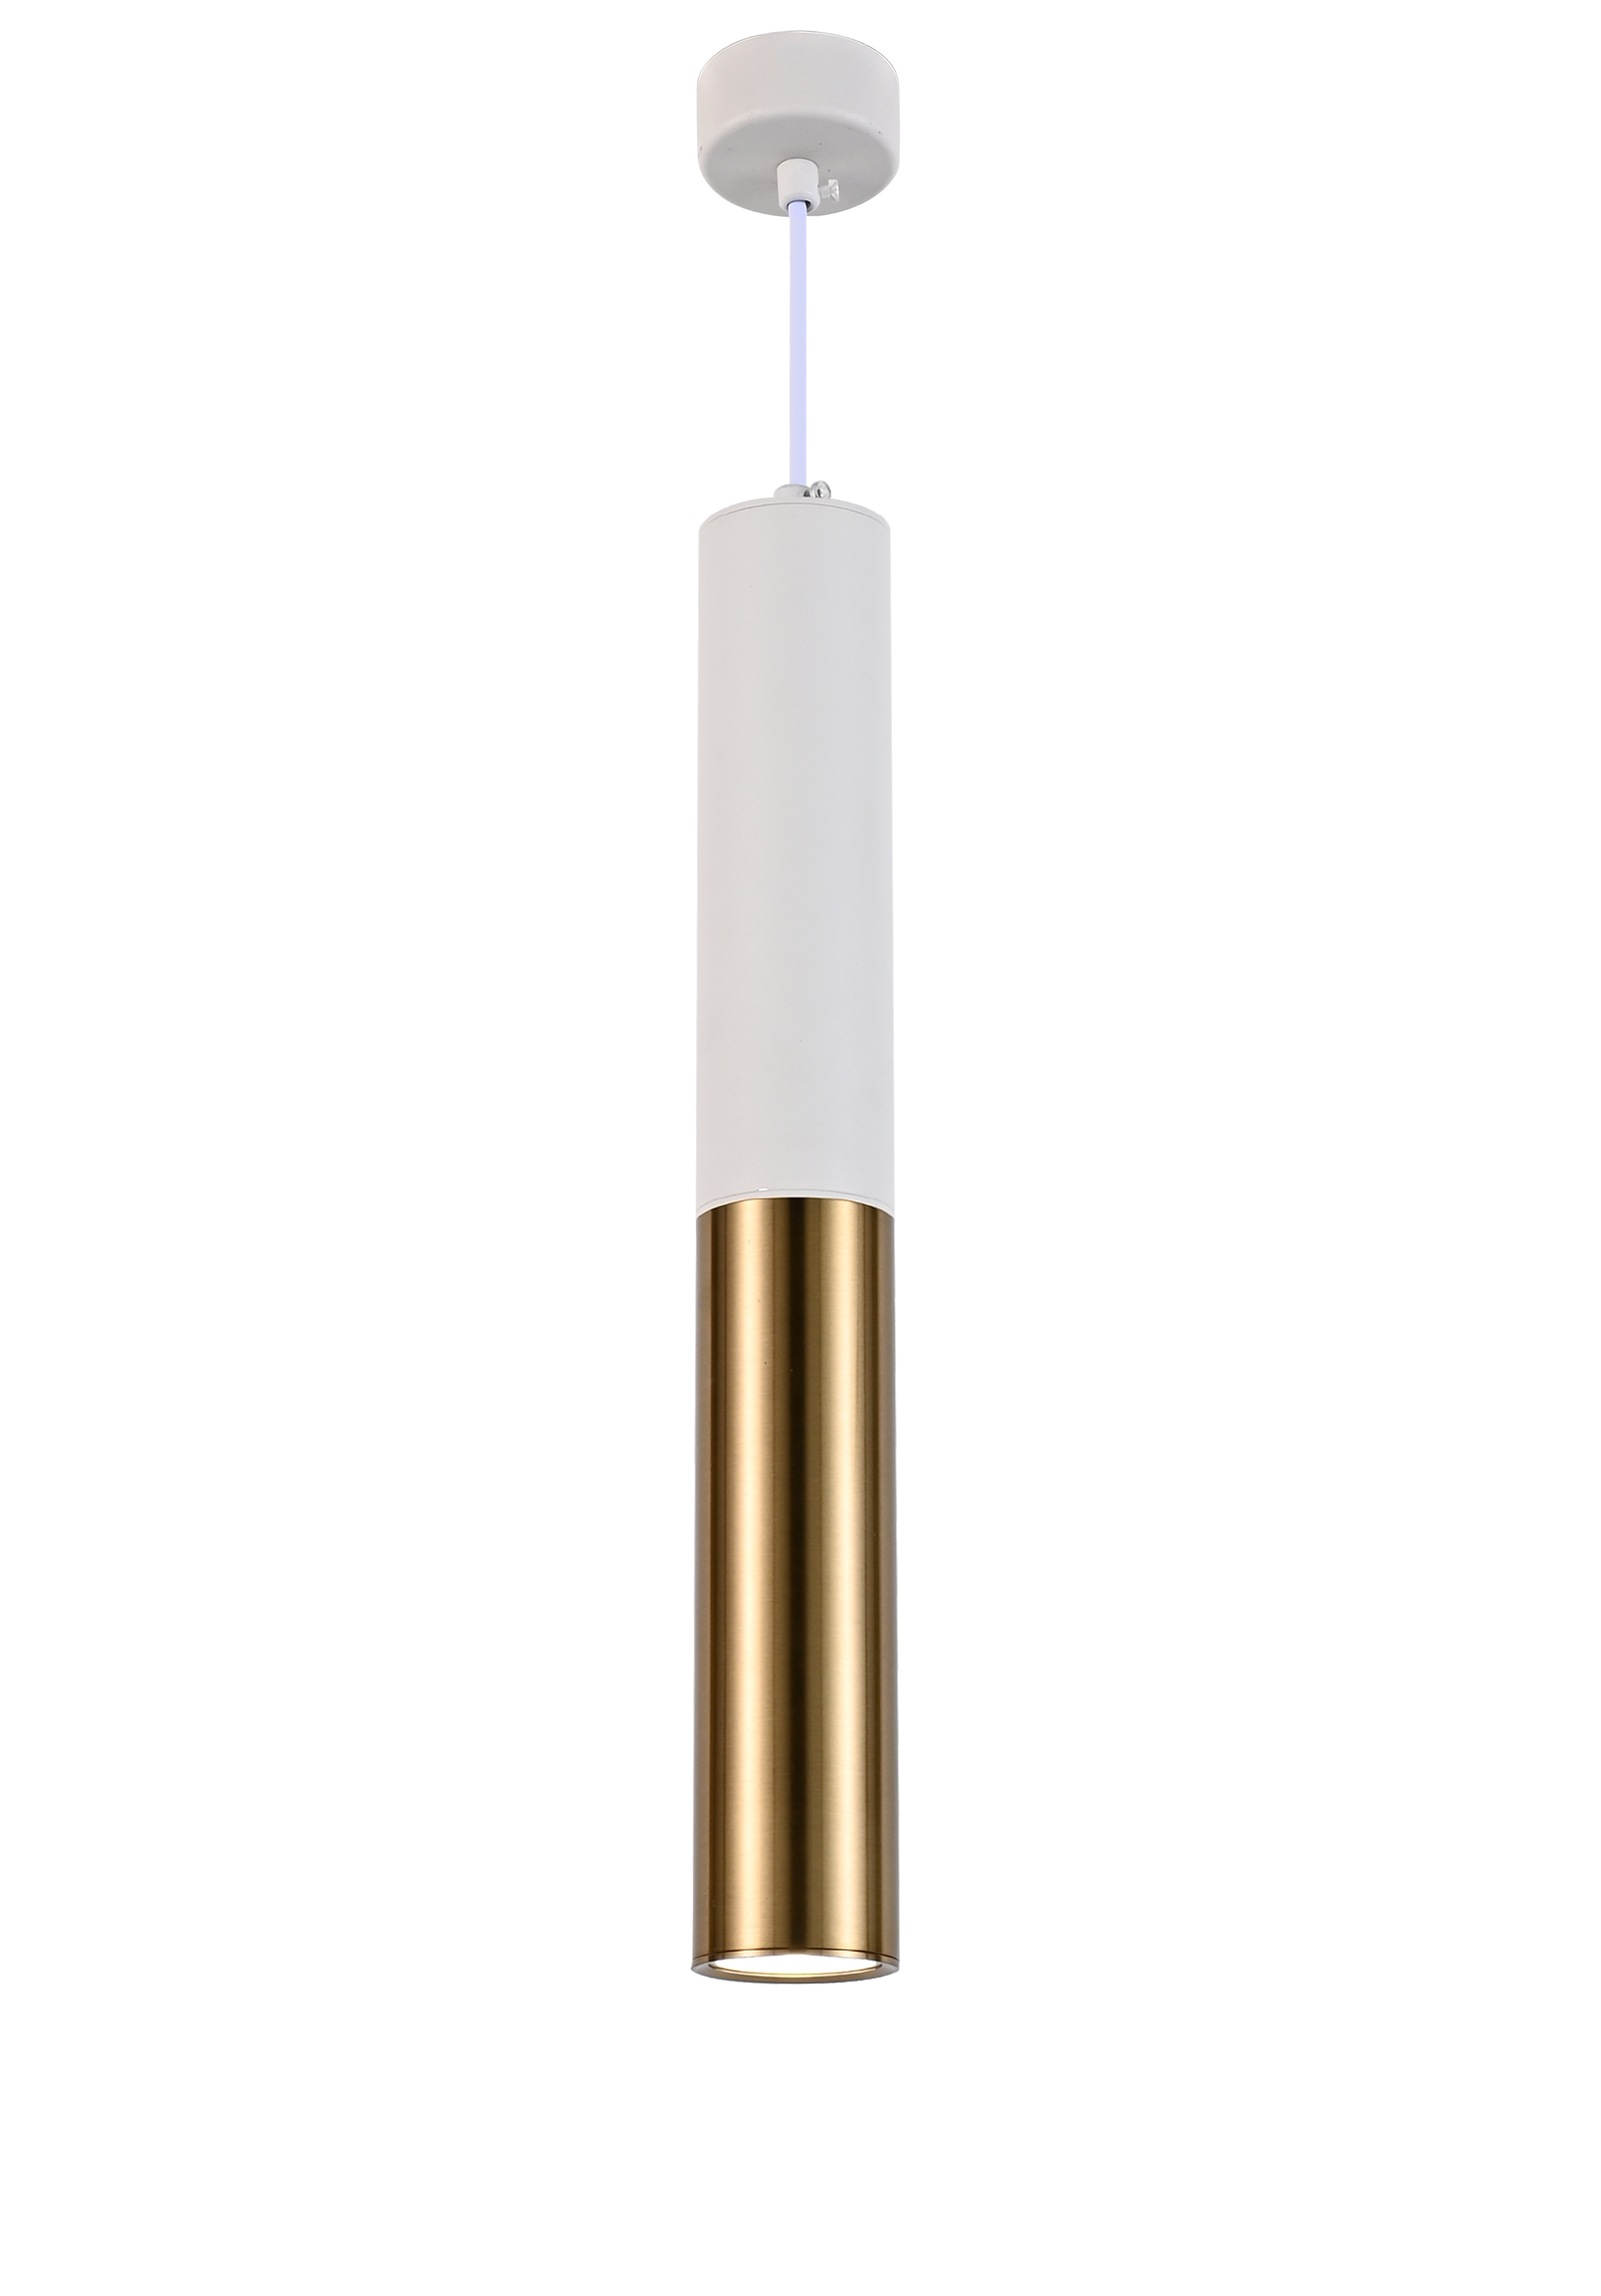 Светильник Nuolang 1005W+G-S WHITE+GOLD